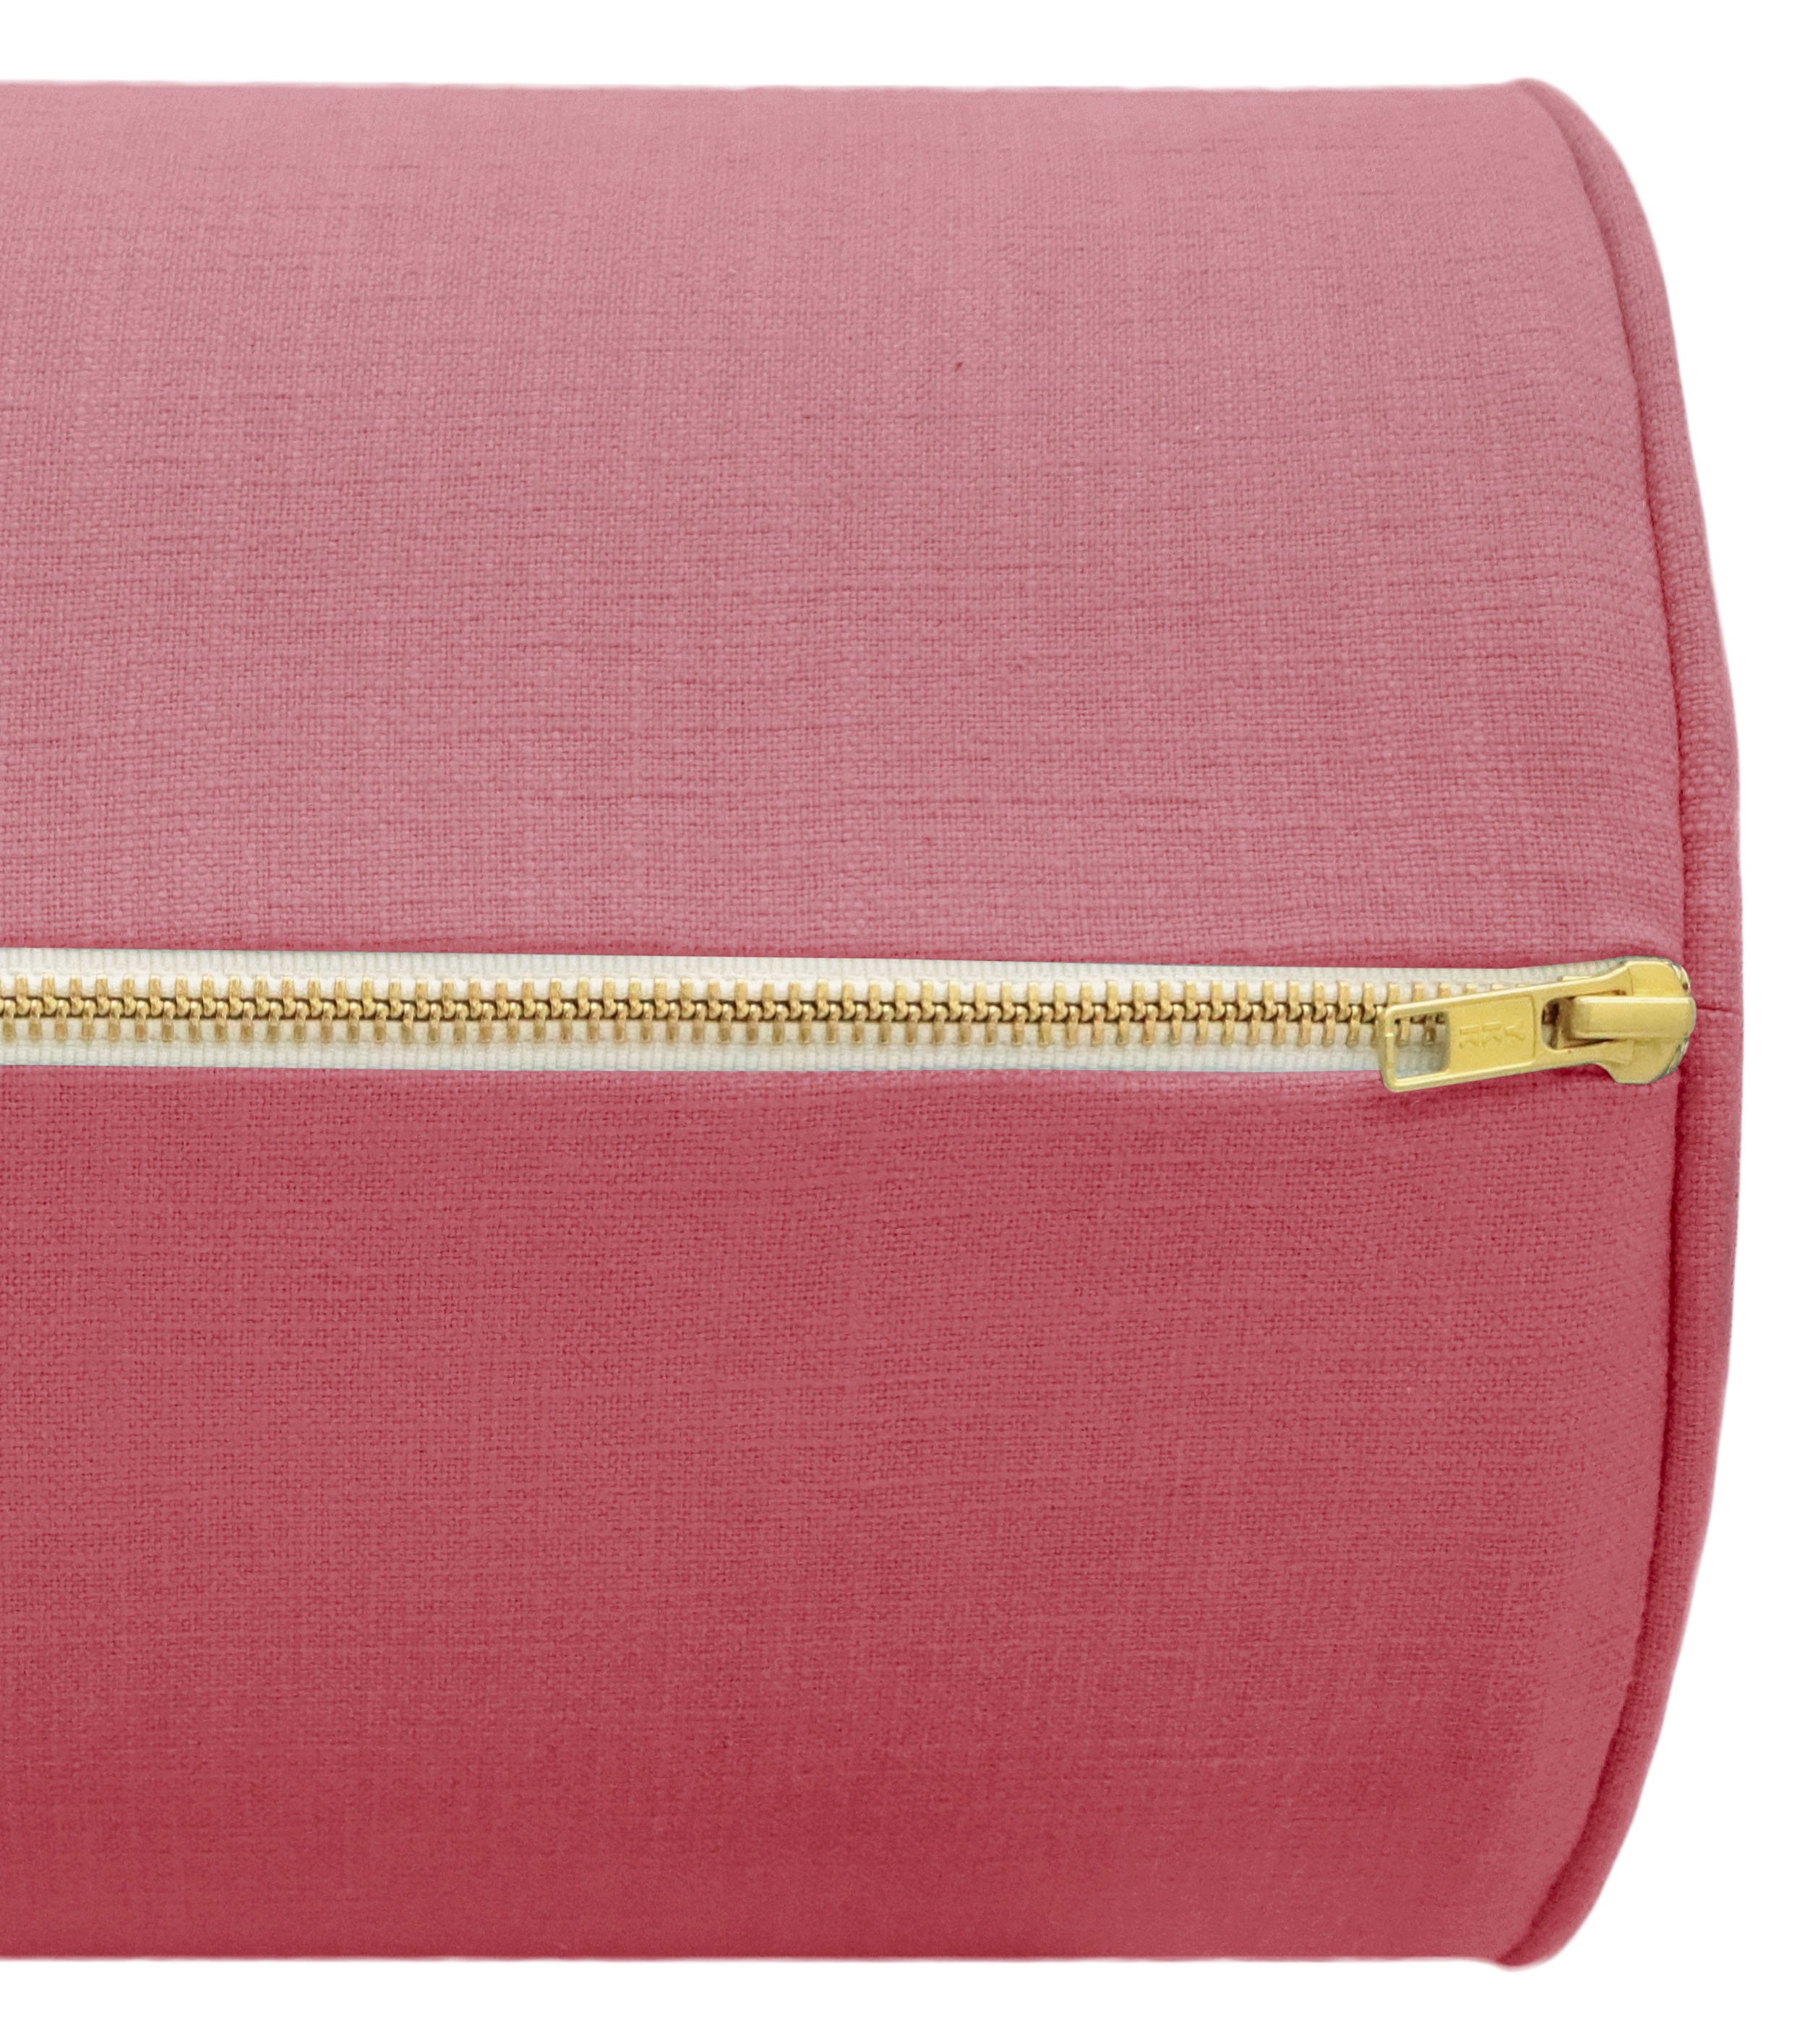 The Bolster :: Classic Linen // Rosé Pink (new) - KING // 9" X 48" - Image 3